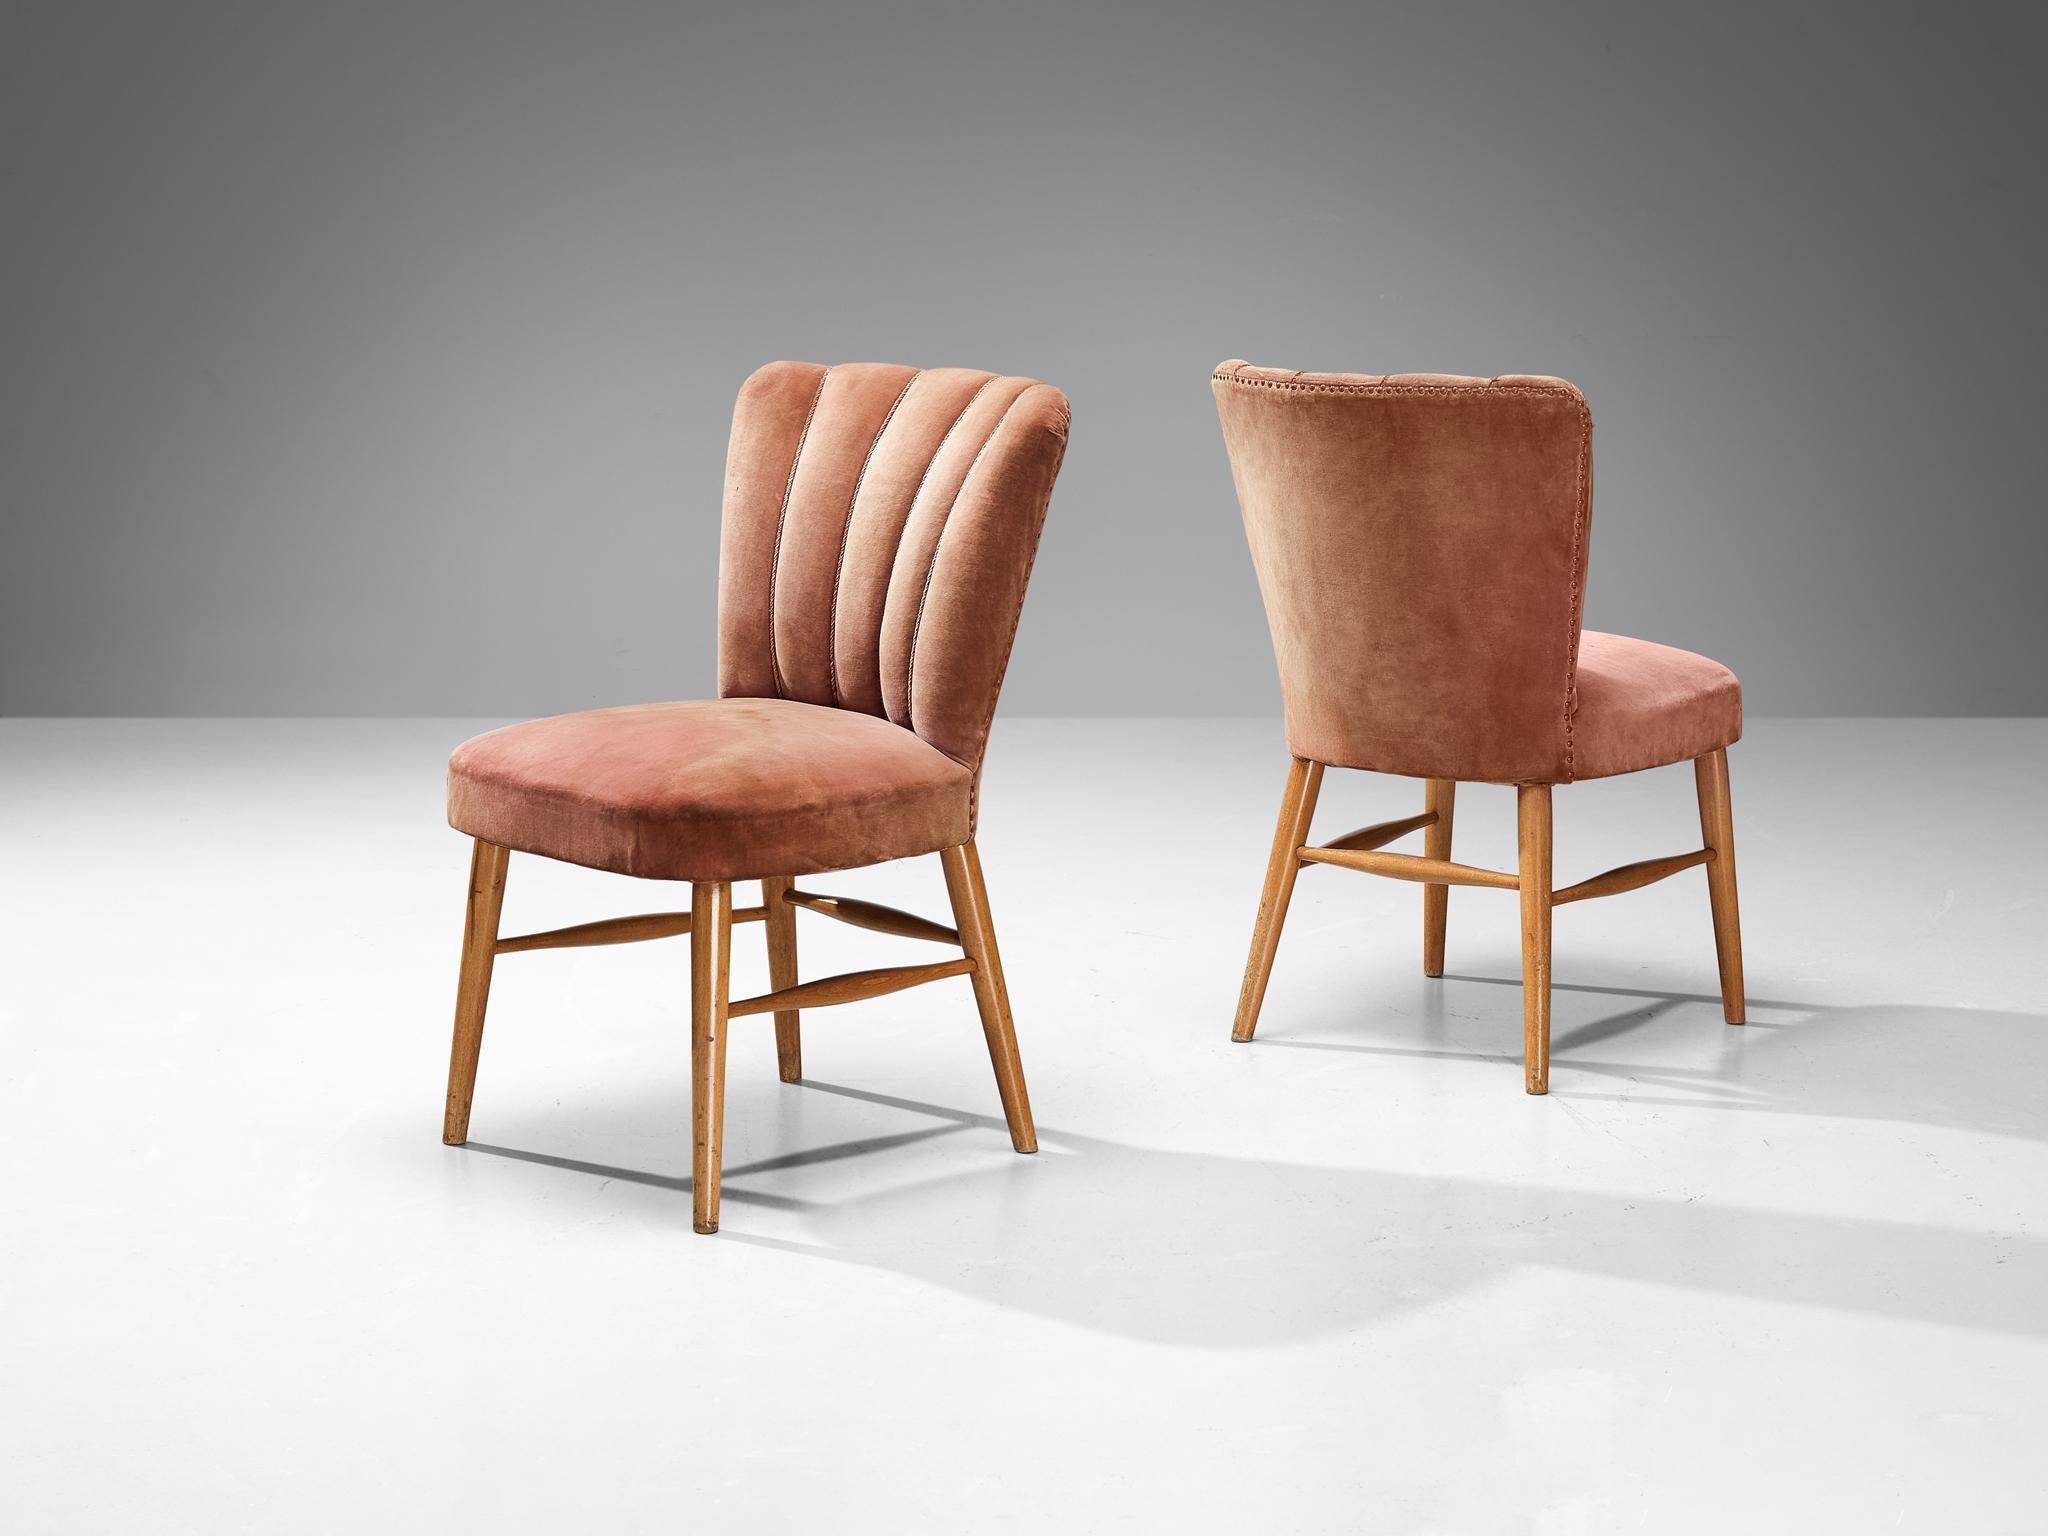 Mid-20th Century European Dining Chairs in Soft Pink Velvet Upholstery and Wood  For Sale